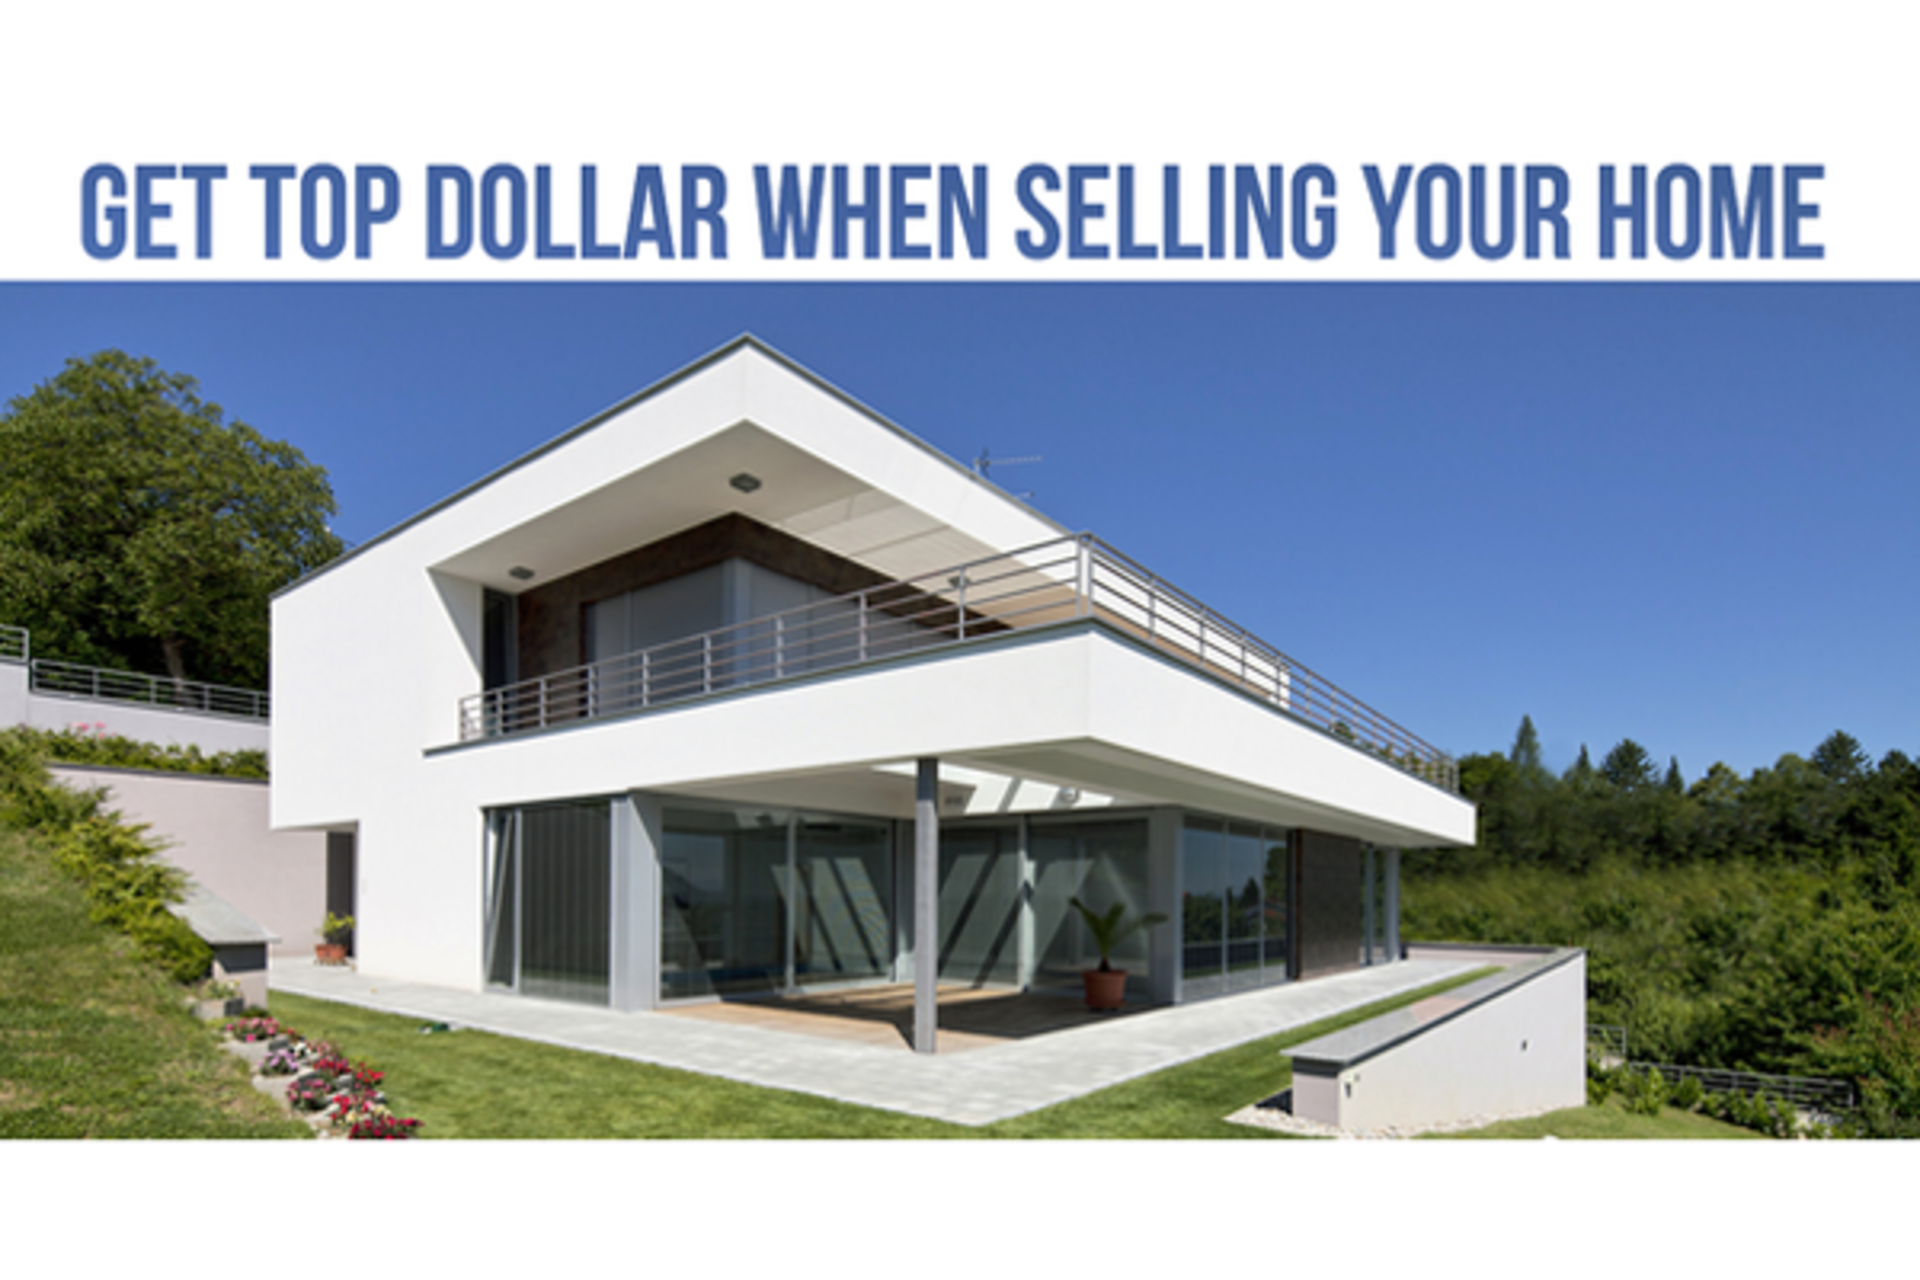 Get Top Dollar When Selling